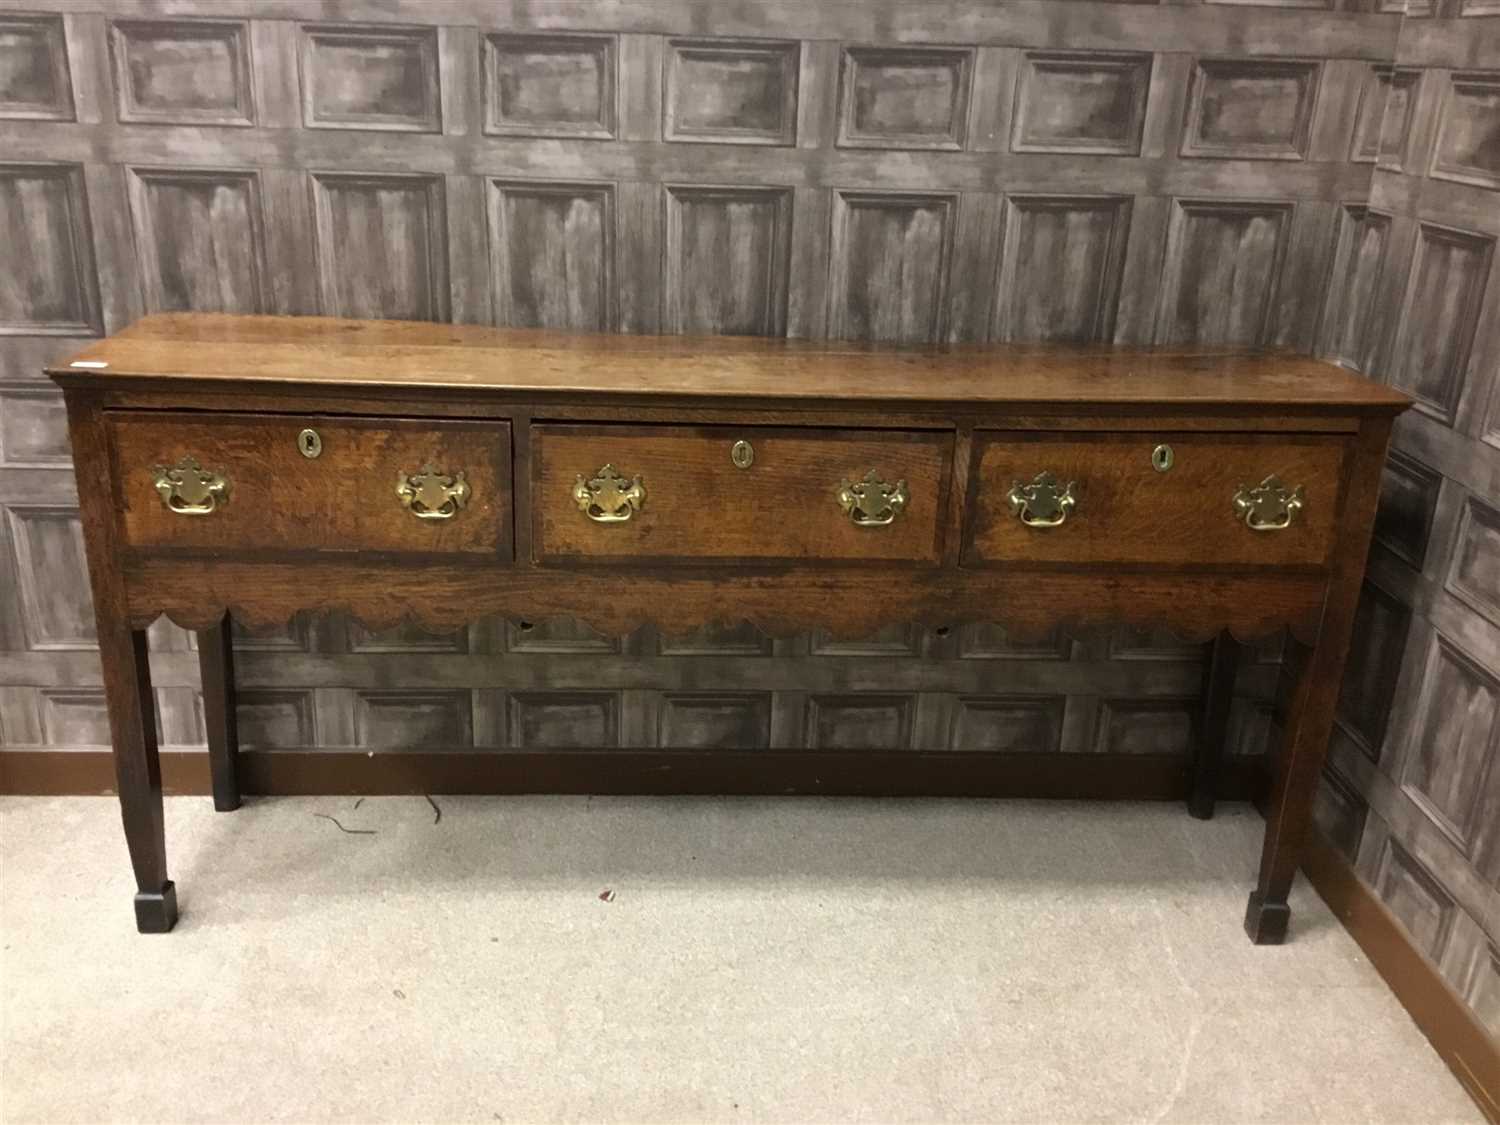 Lot 887 - A MID 18TH CENTURY OAK AND ELM BACKLESS DRESSER